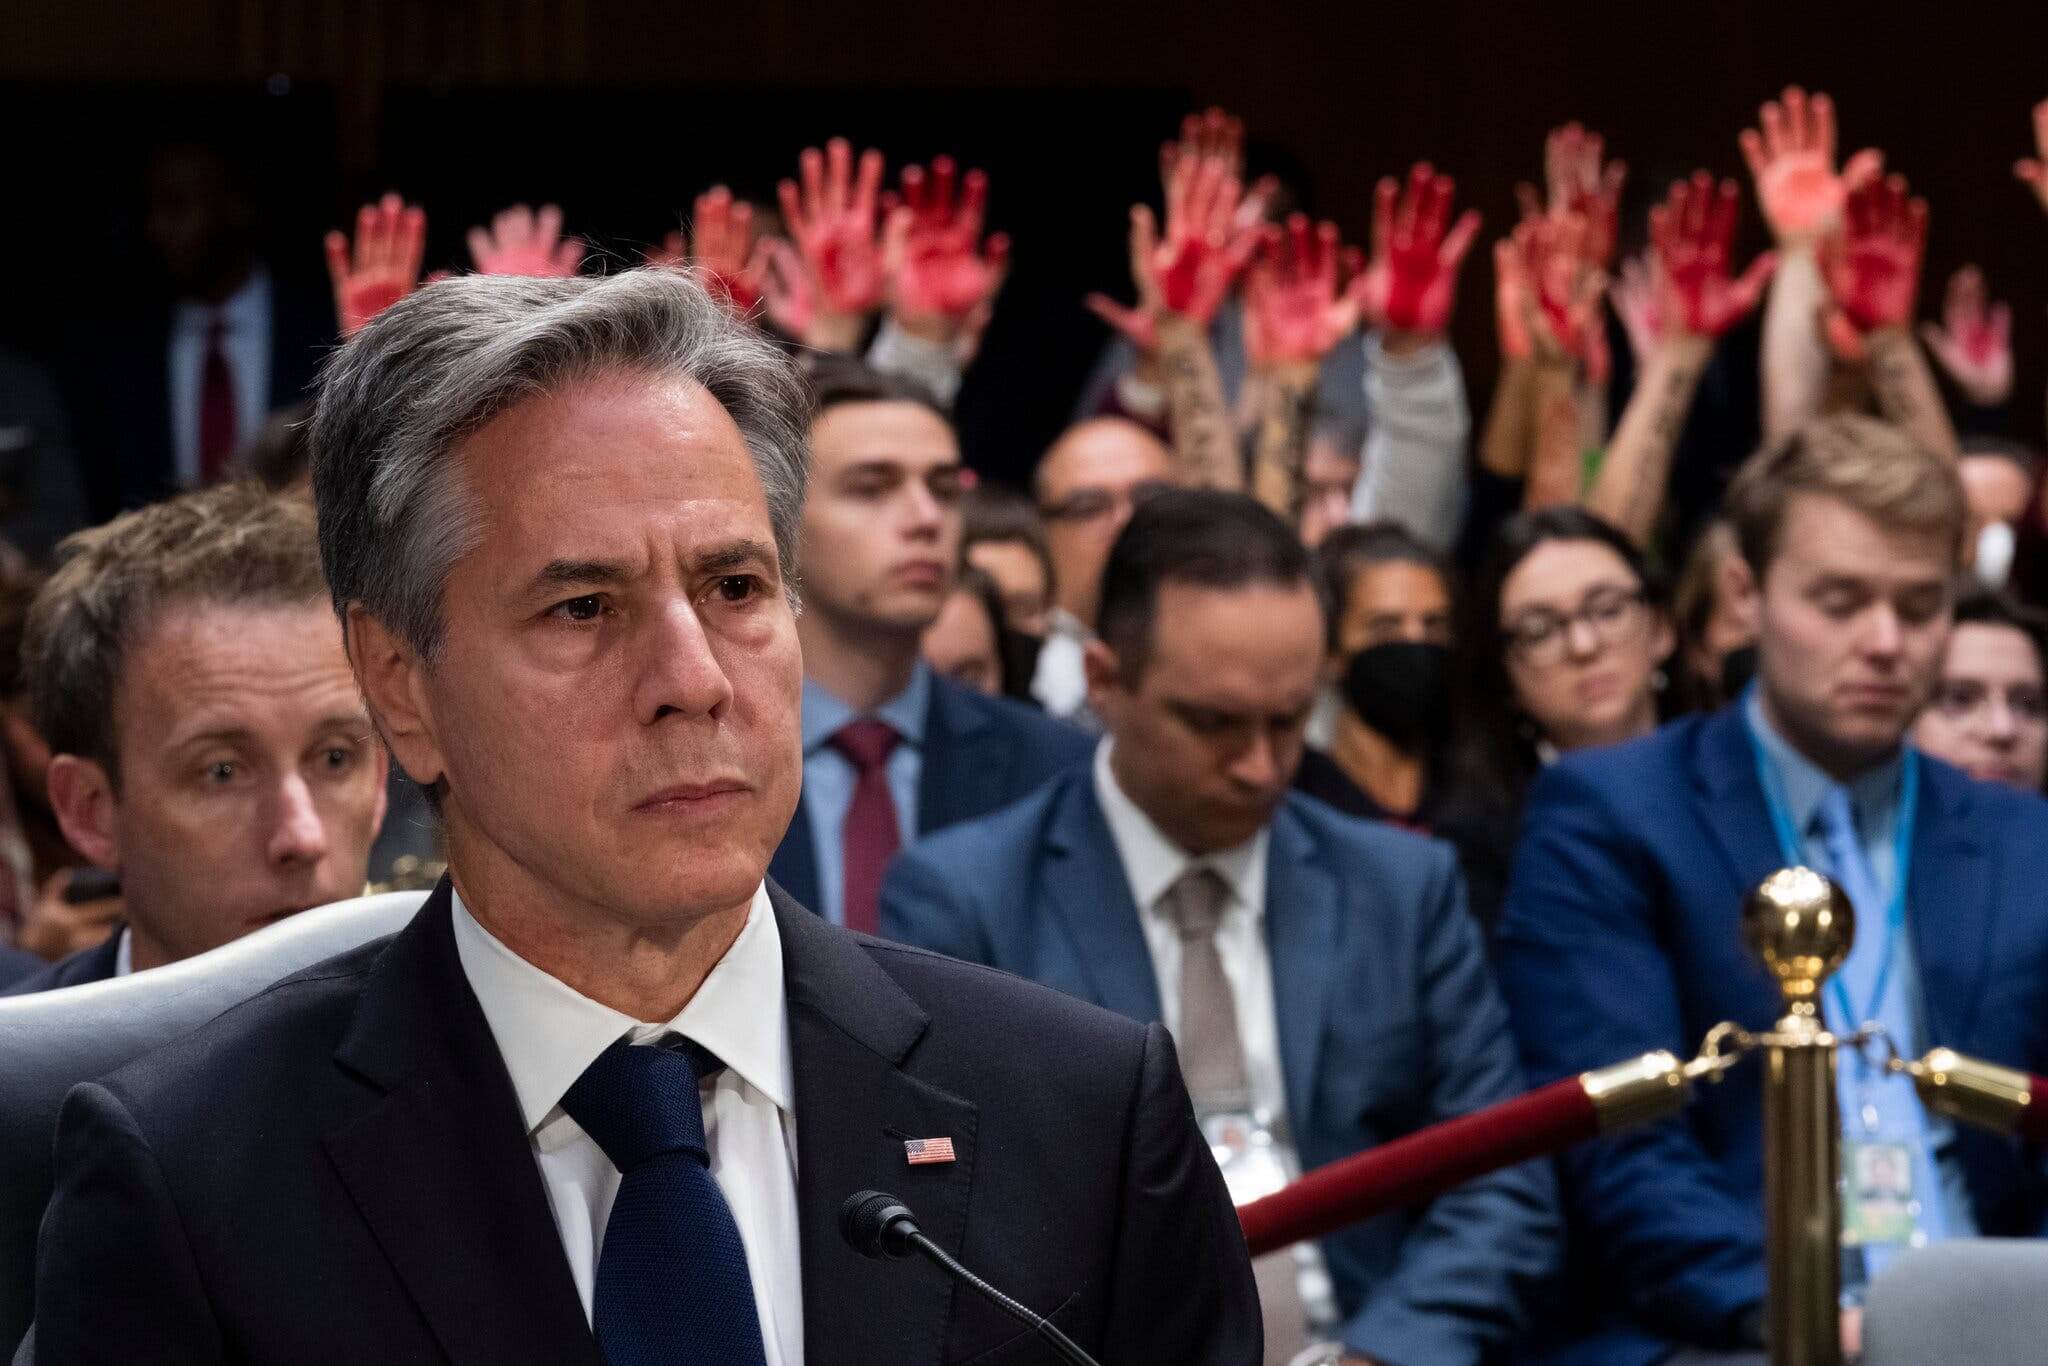 Antony Blinken at a senate hearing on October 31, 2023 regarding a budget request for Israel. Behind him, activists hold up red-painted hands in protest of U.S. support for Israel's bombing campaign in Gaza.